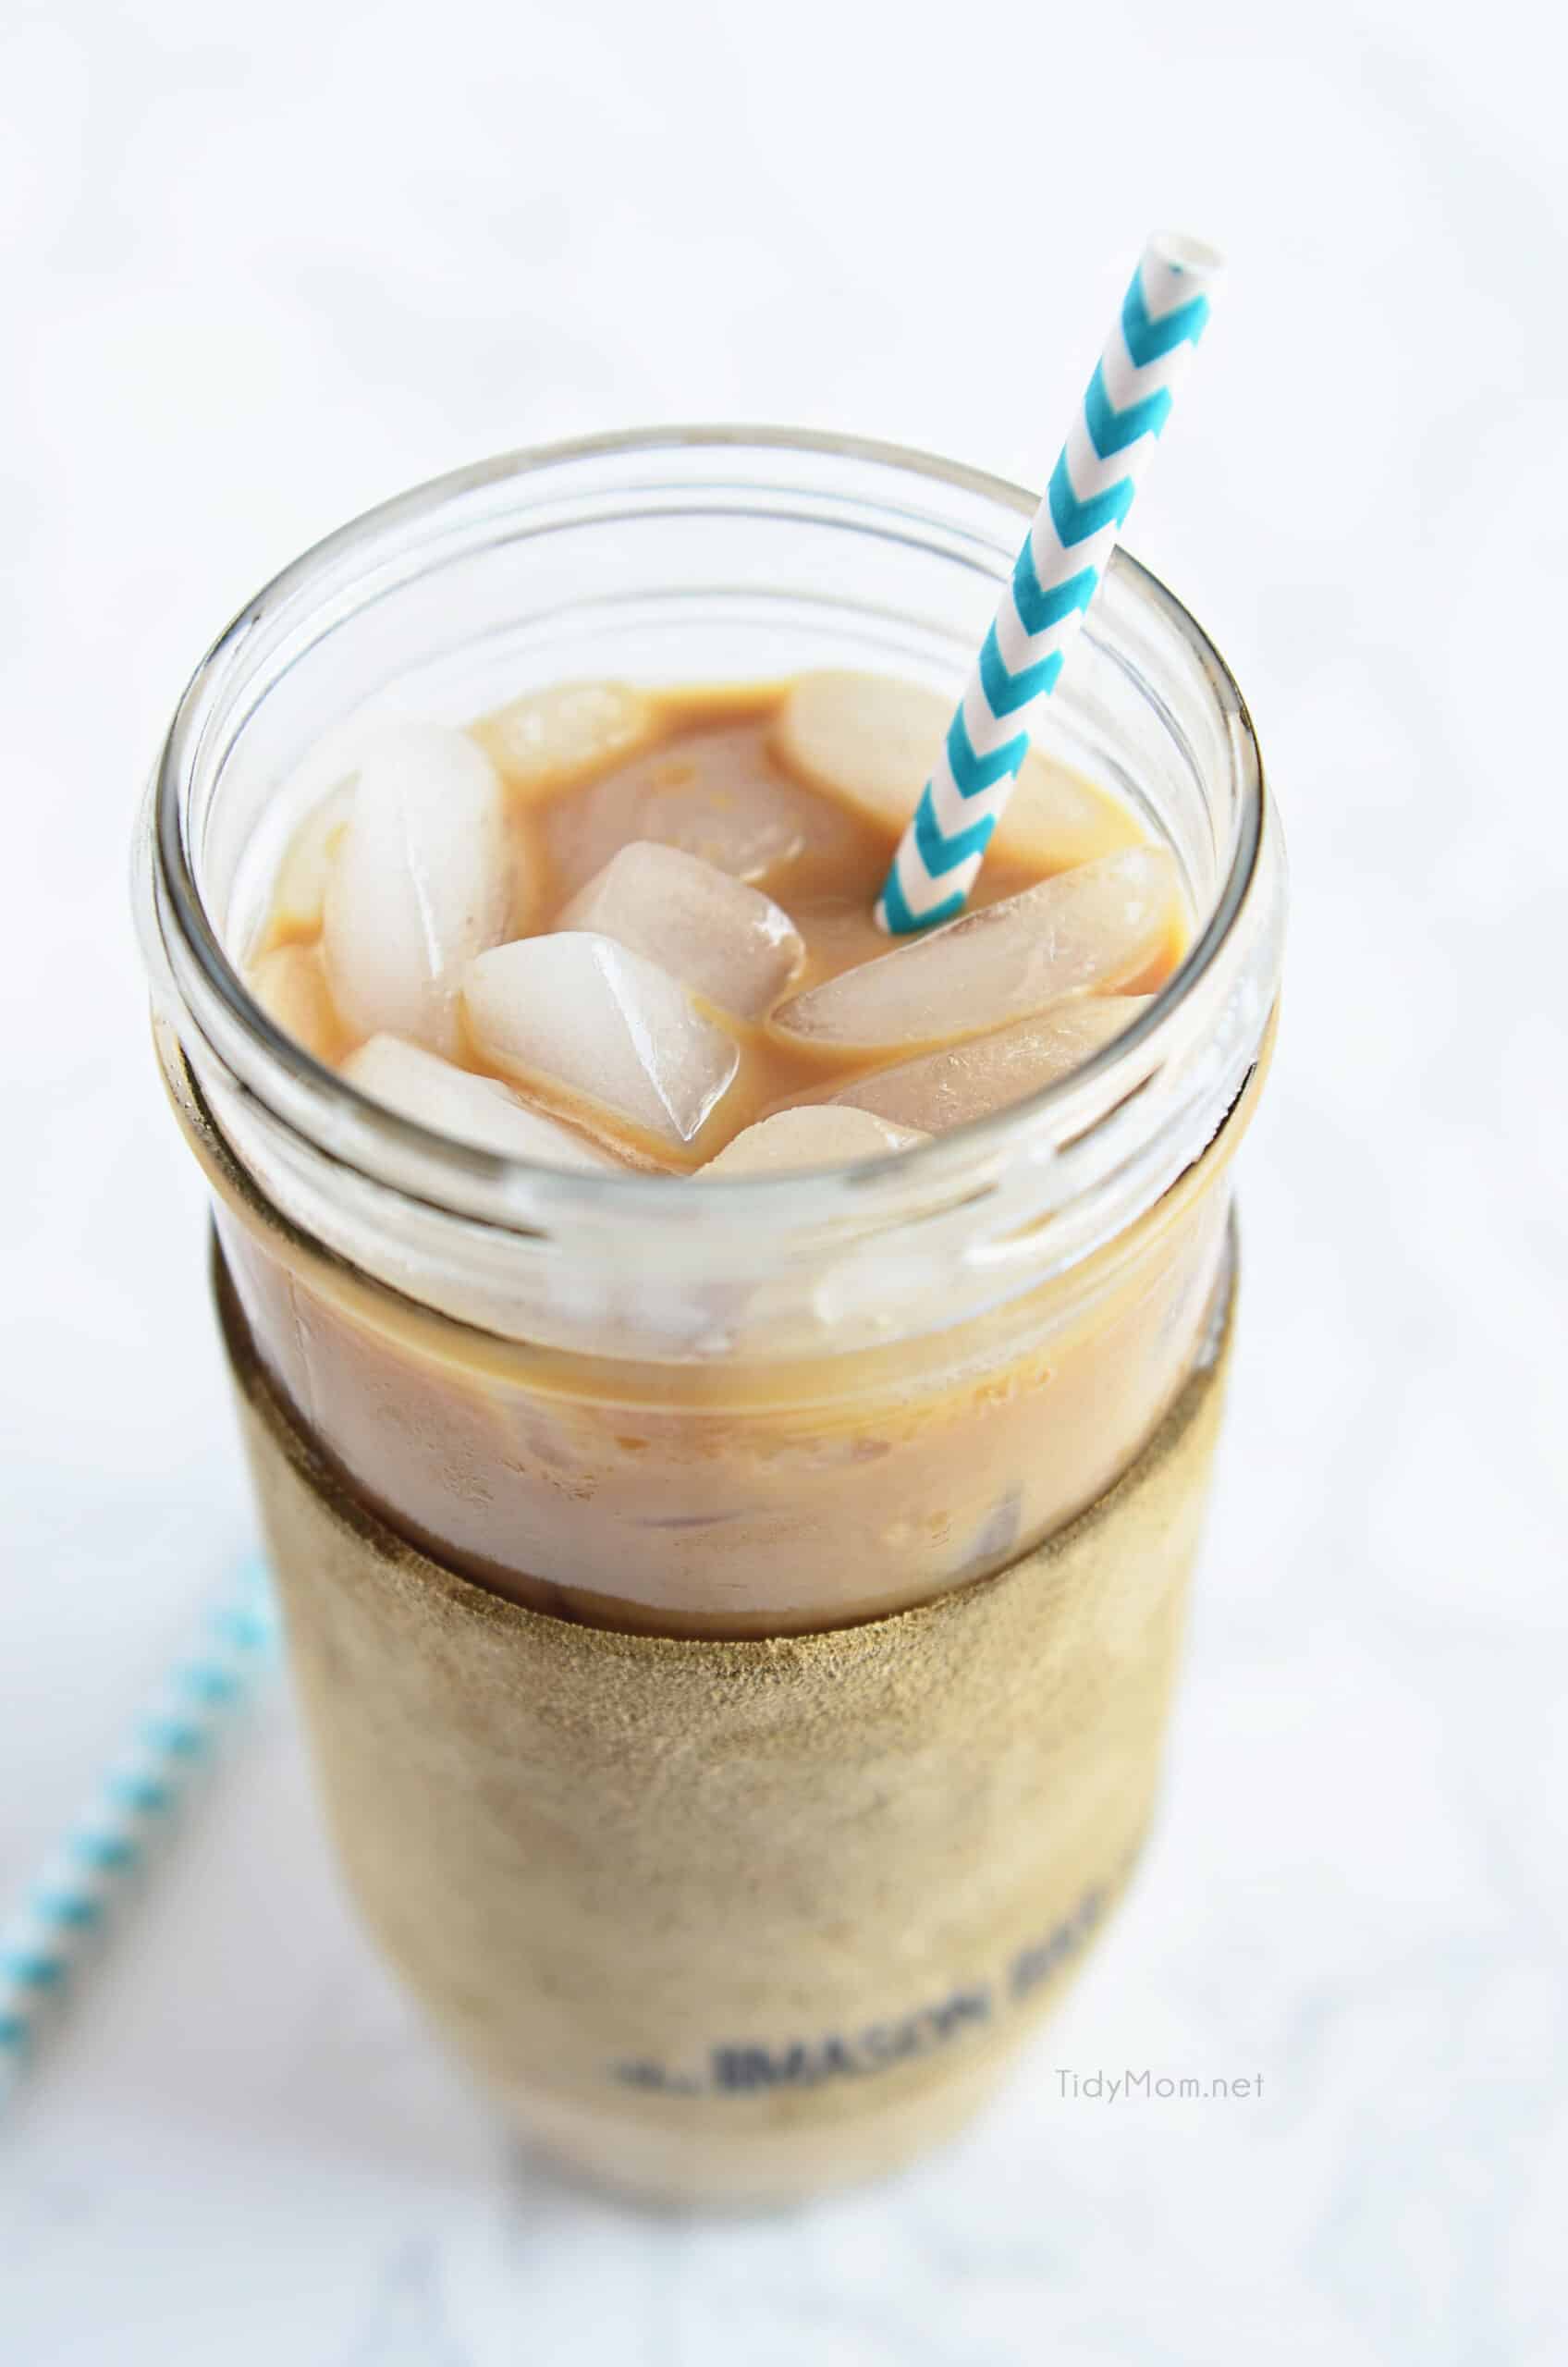 Cute Hearts Iced Coffee Cup Cold Brew Valentine's Day 